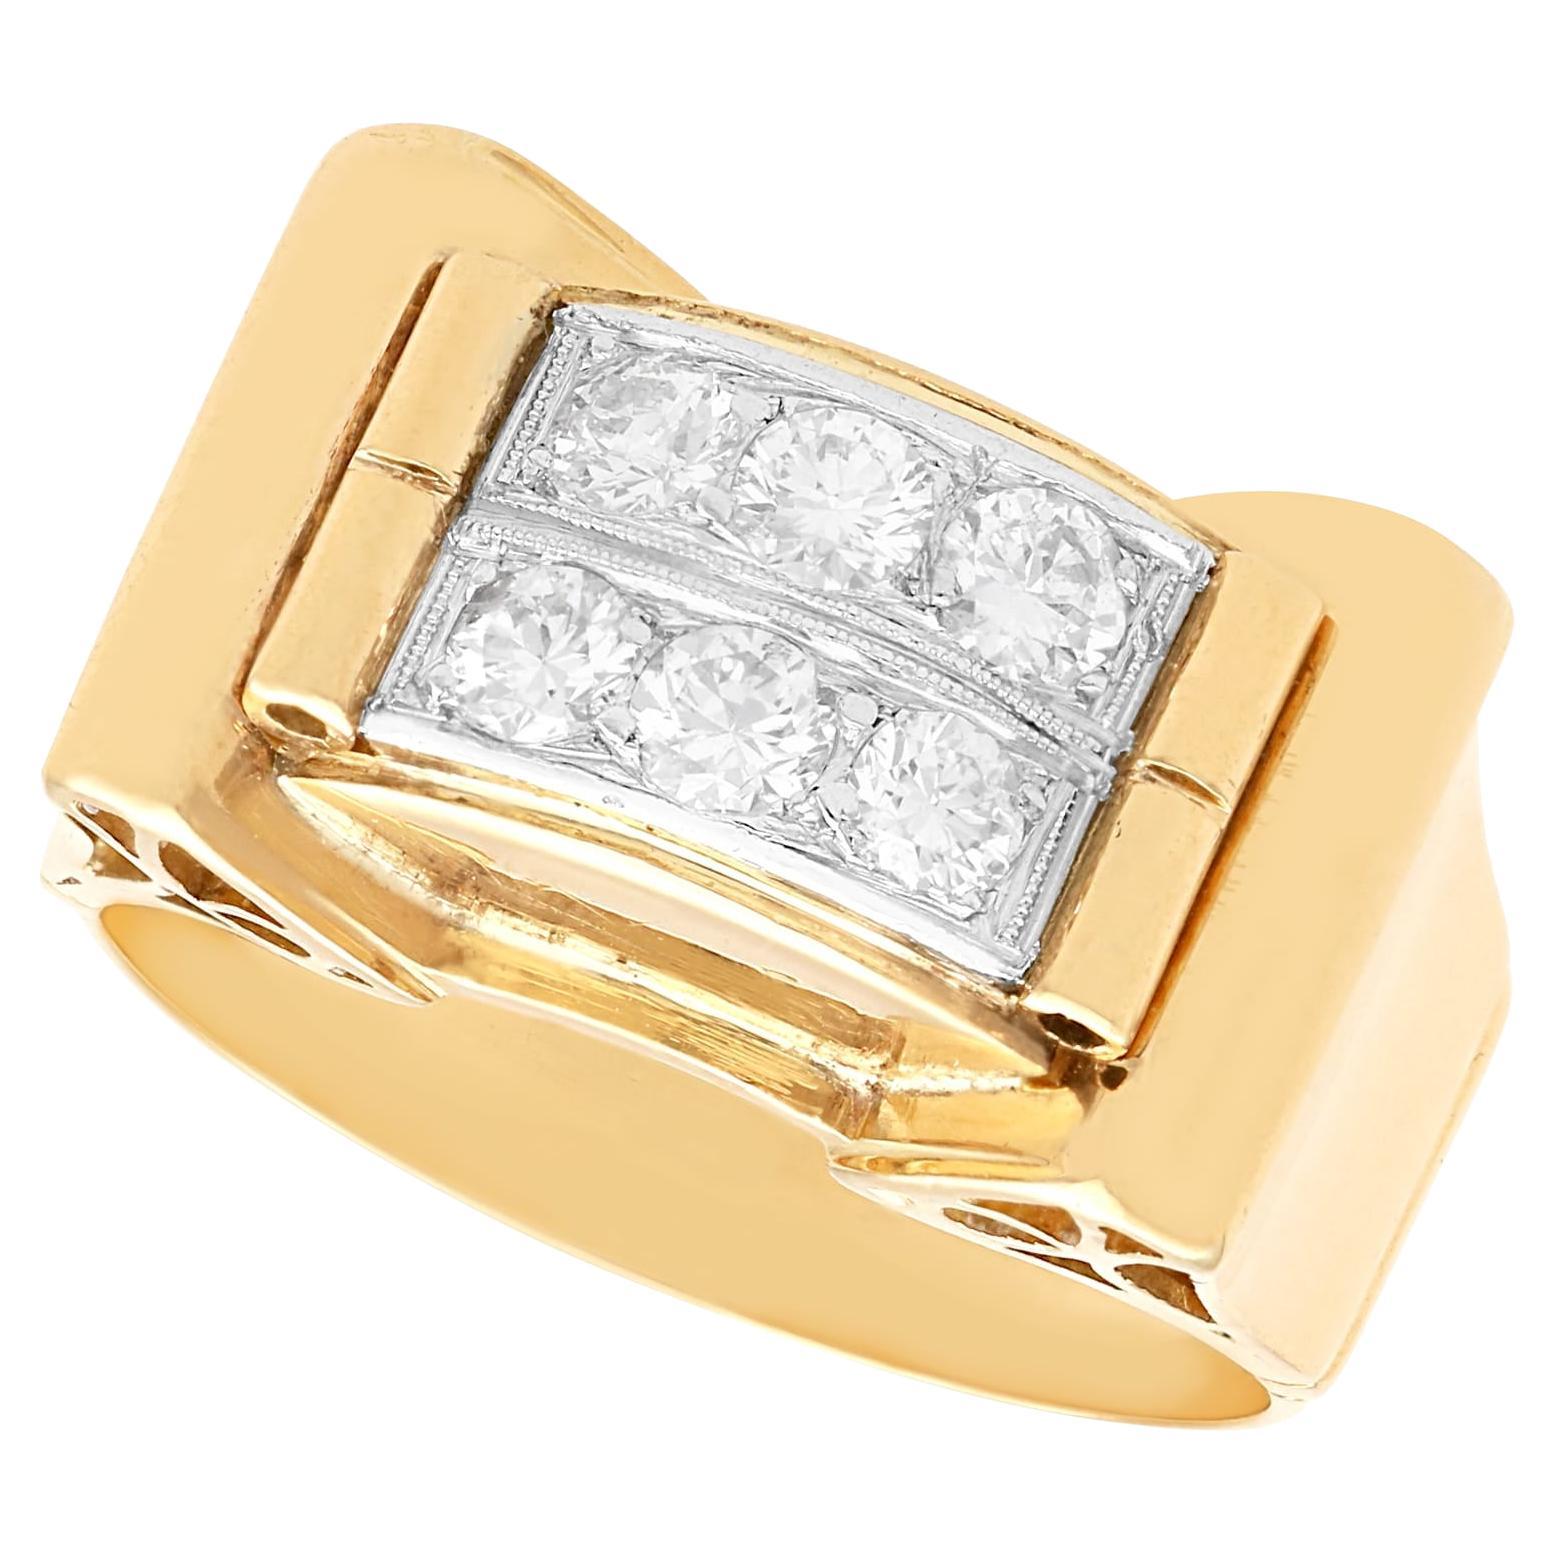 Vintage 1940s Art Deco Diamond and Gold Cocktail Ring For Sale